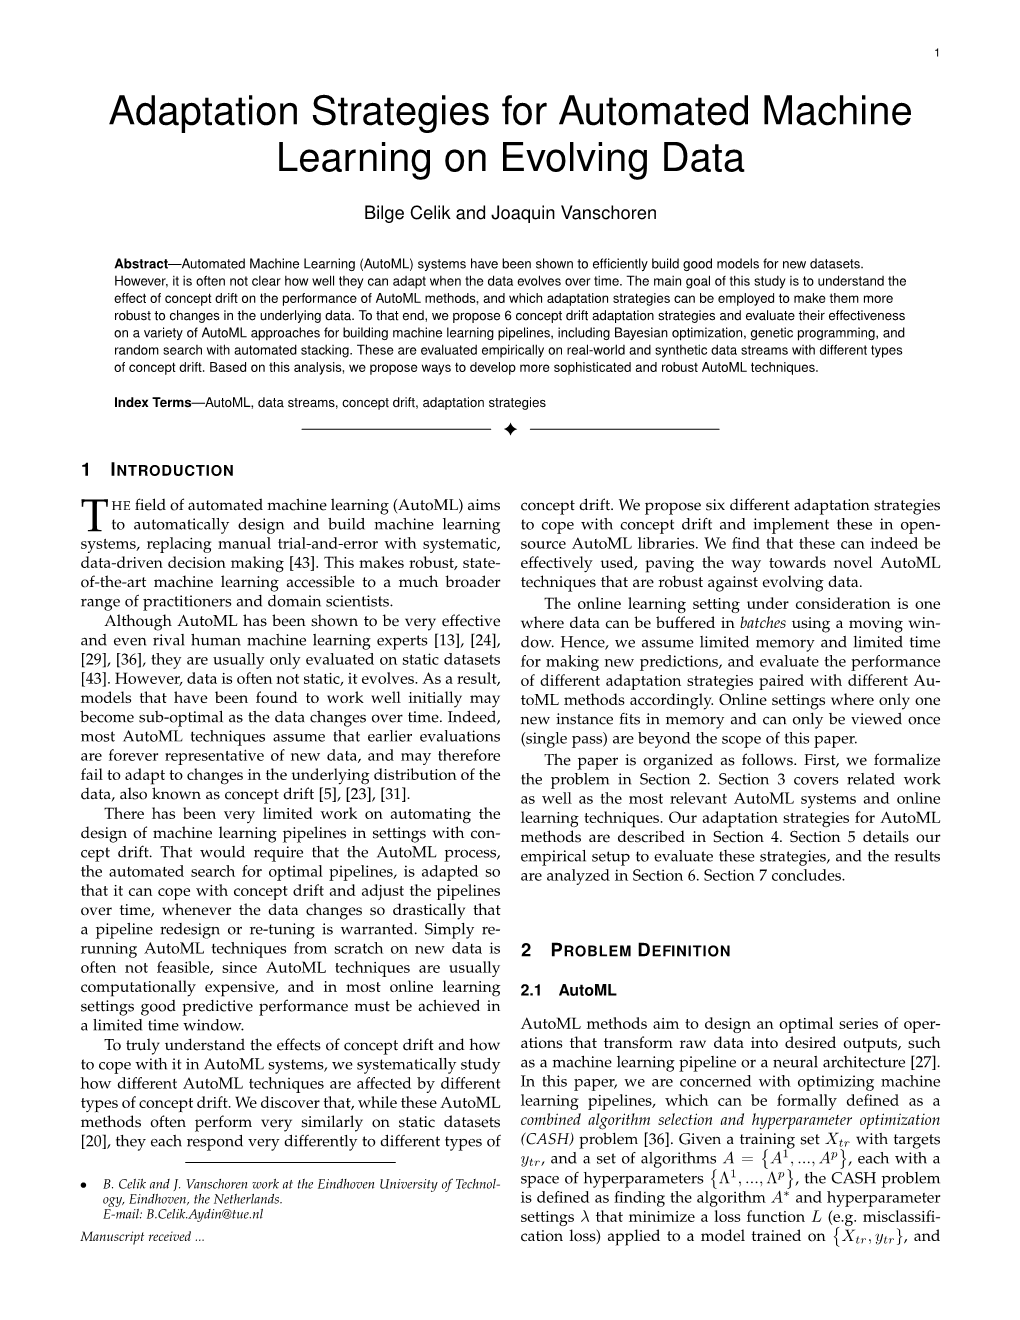 Adaptation Strategies for Automated Machine Learning on Evolving Data